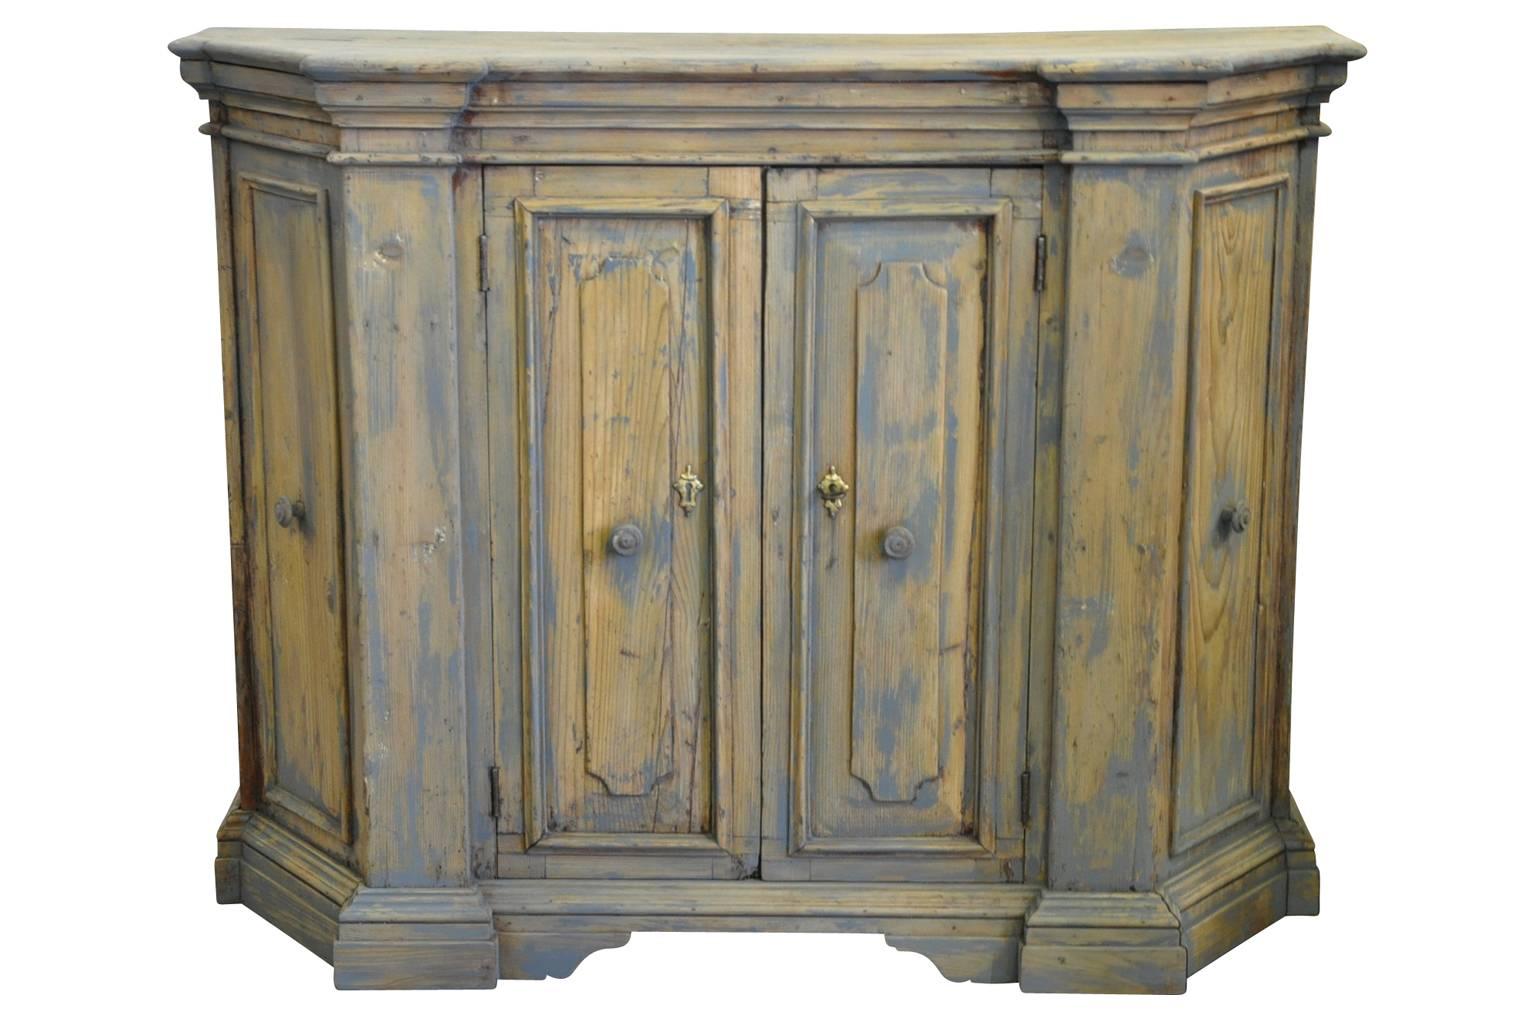 A charming later 18th century credenza from Northern Italy. Wonderfully constructed from pine with a very handsome molded crown over paneled doors.